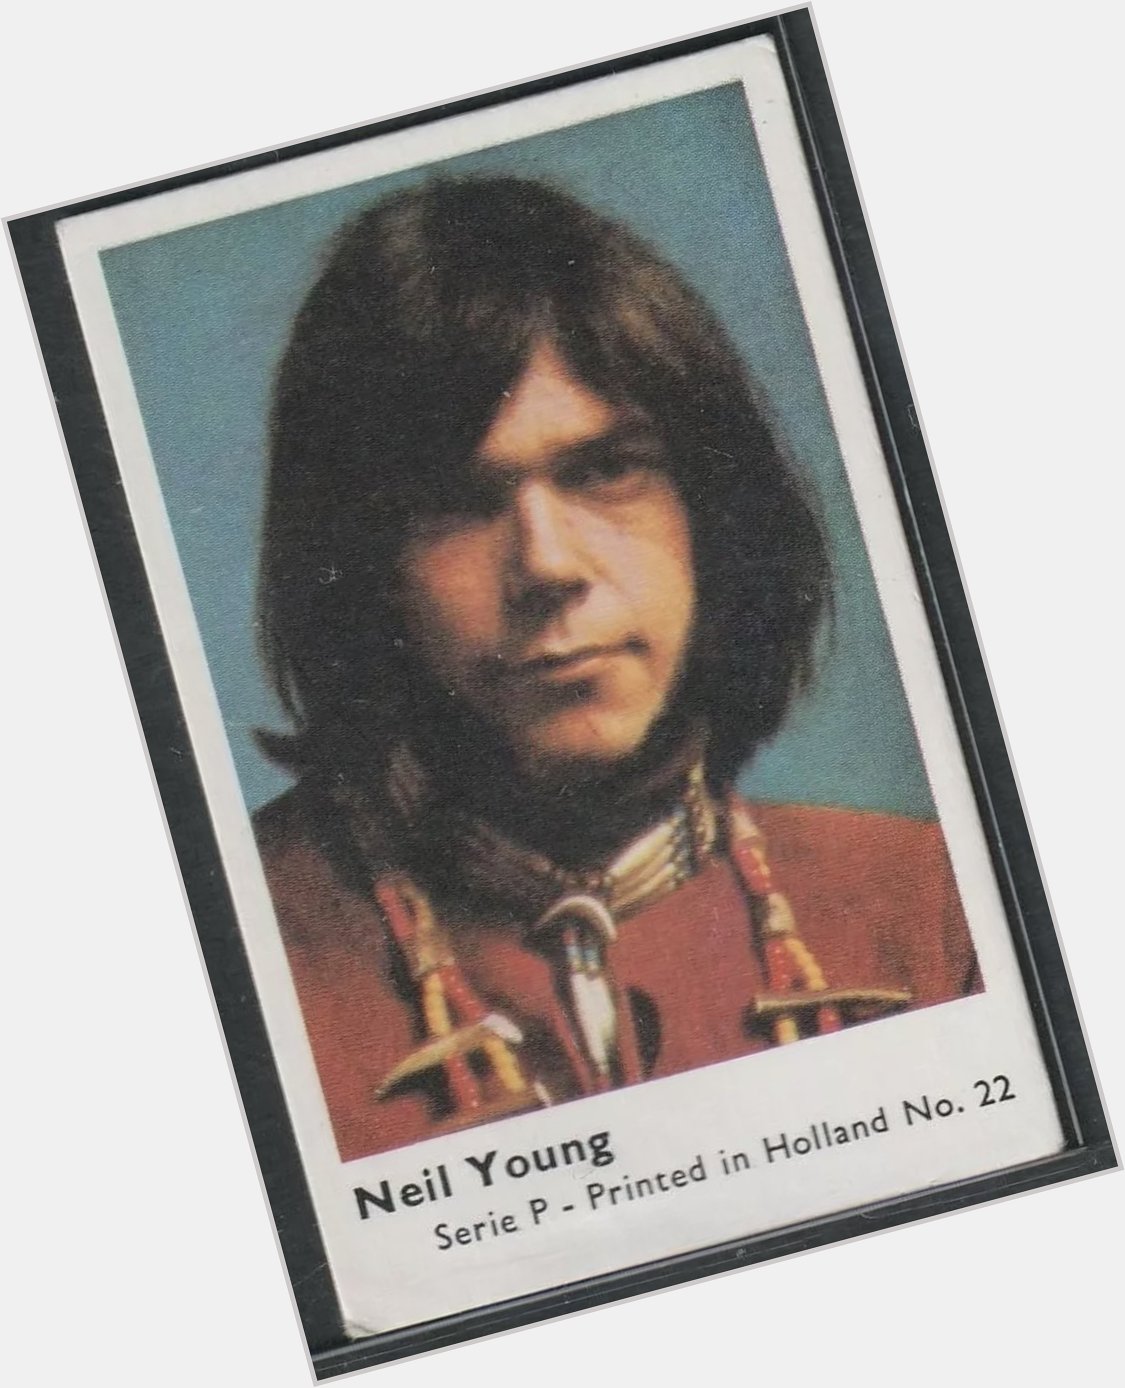 Happy birthday to Neil Young! Long may he run. 